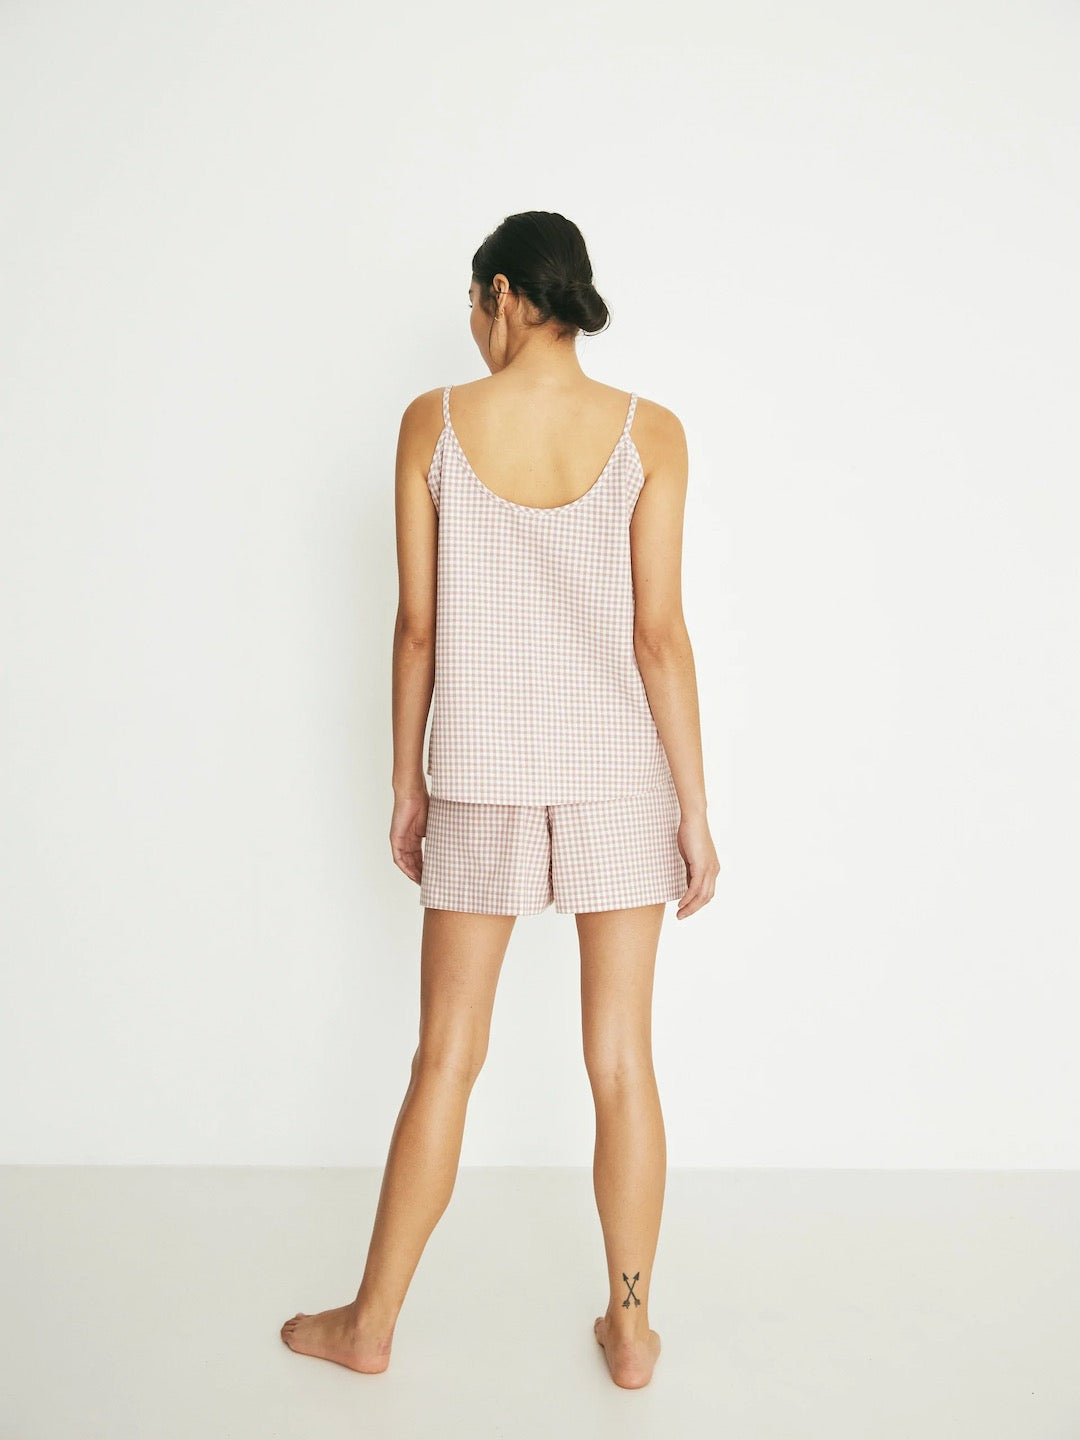 The back view of a woman in a Summer Set - Rose Gingham pajama set by general sleep.